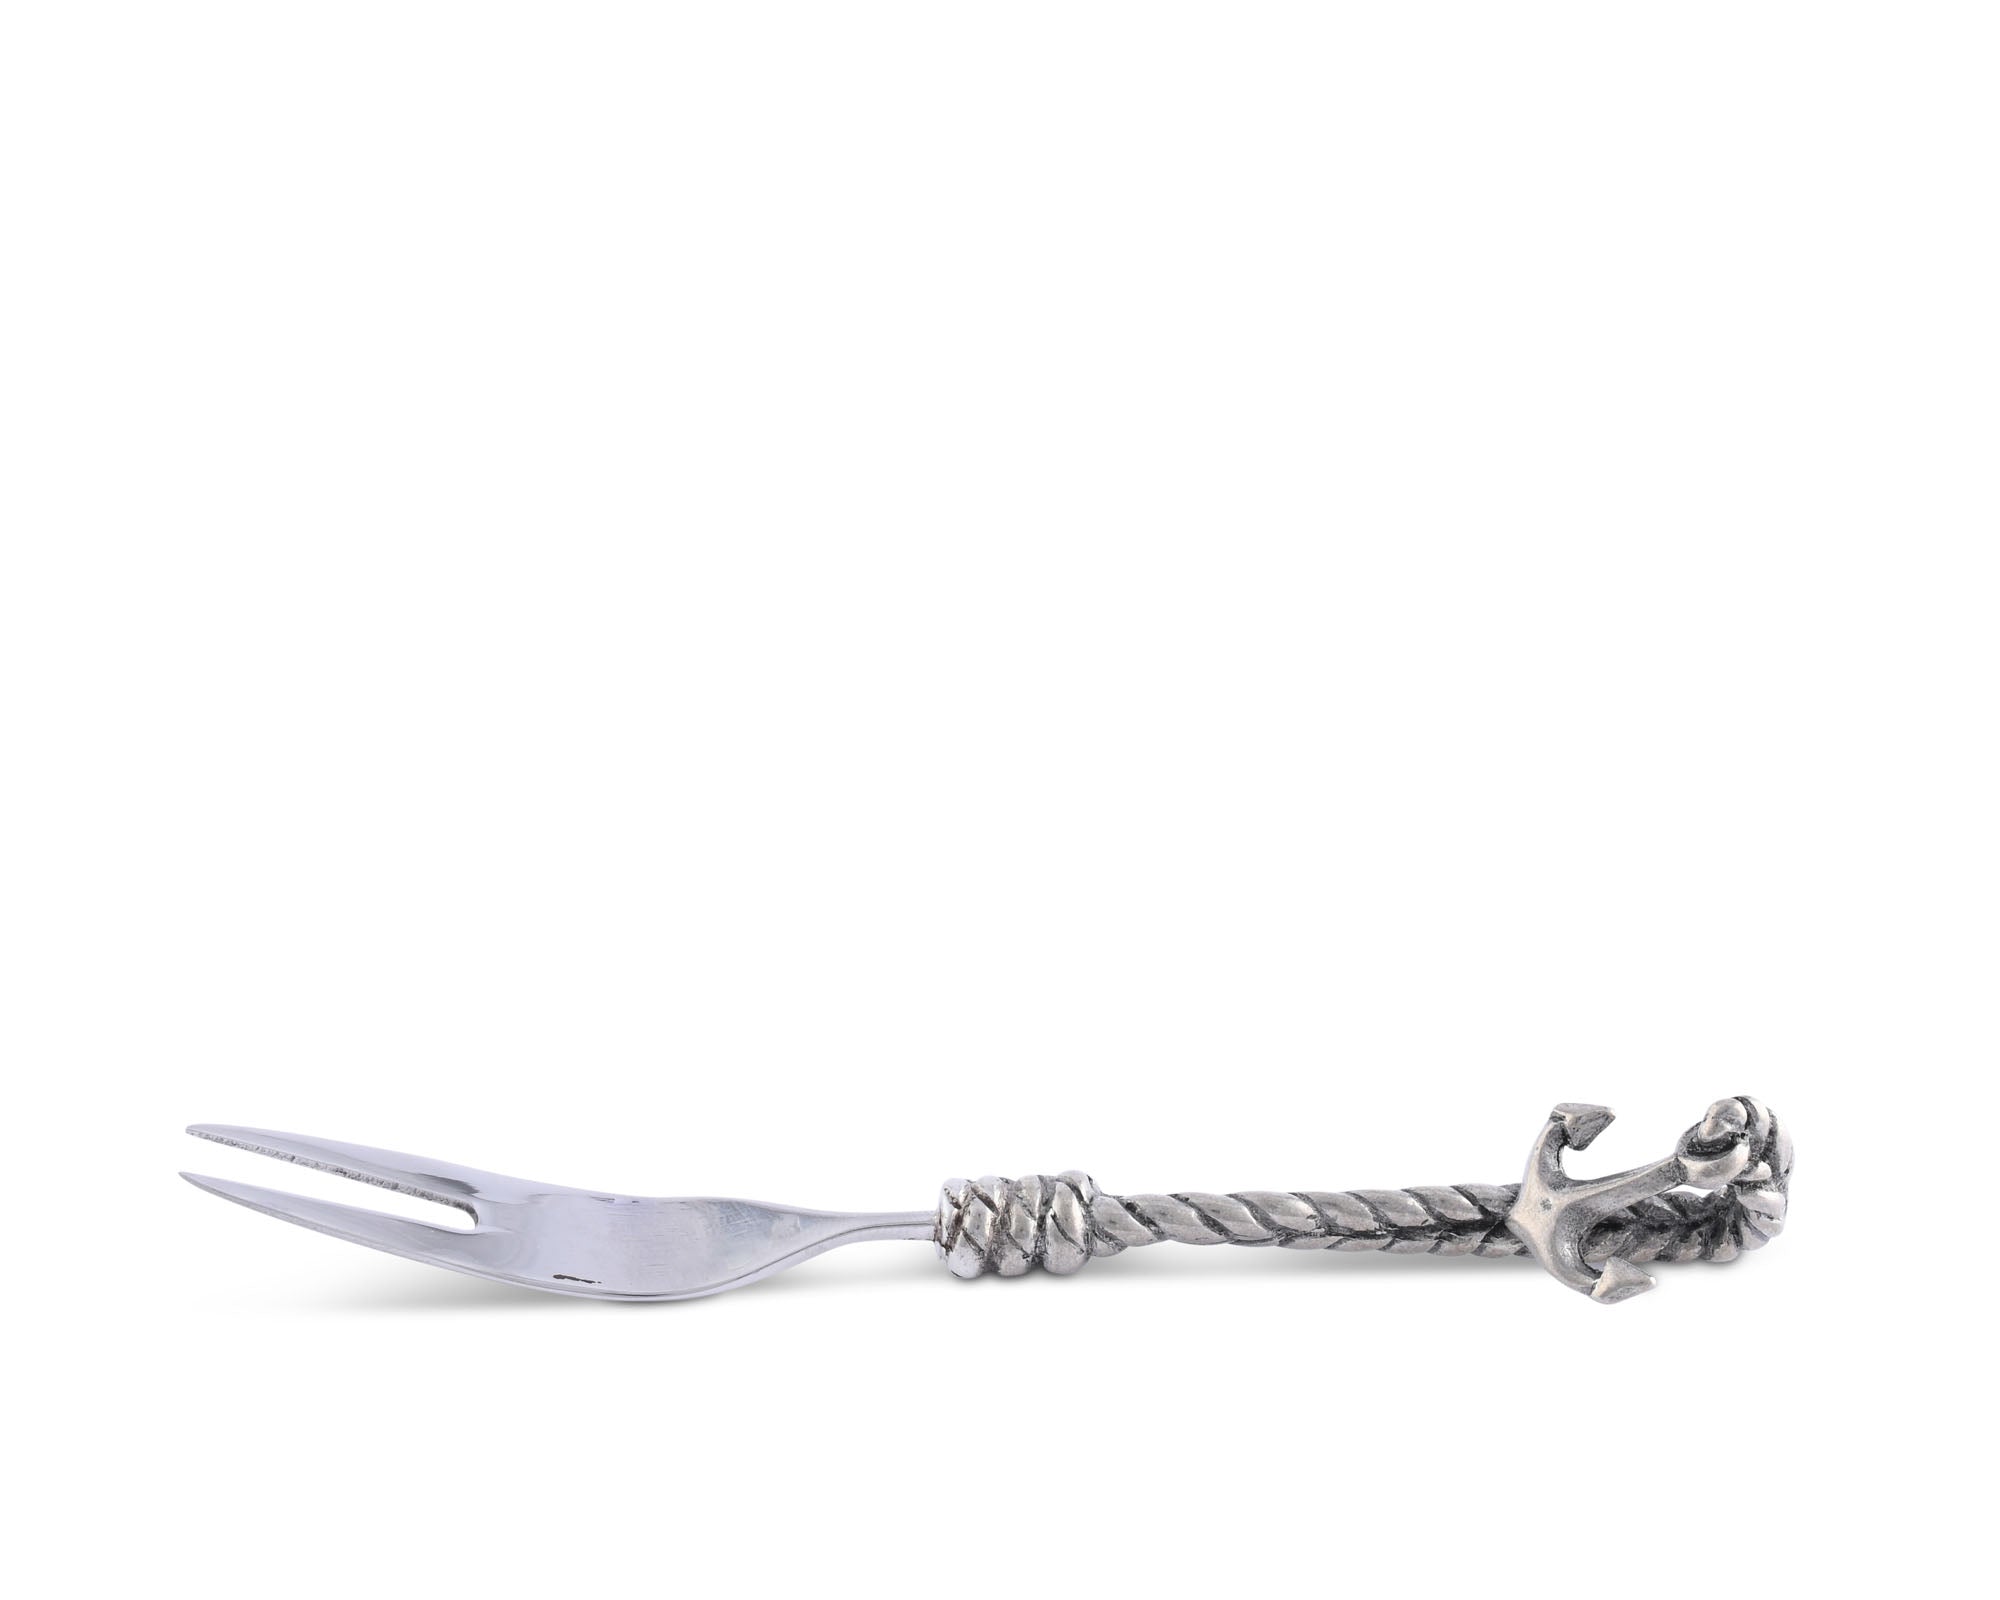 Vagabond House Rope and Anchor Hors d'oeuvre Fork Product Image